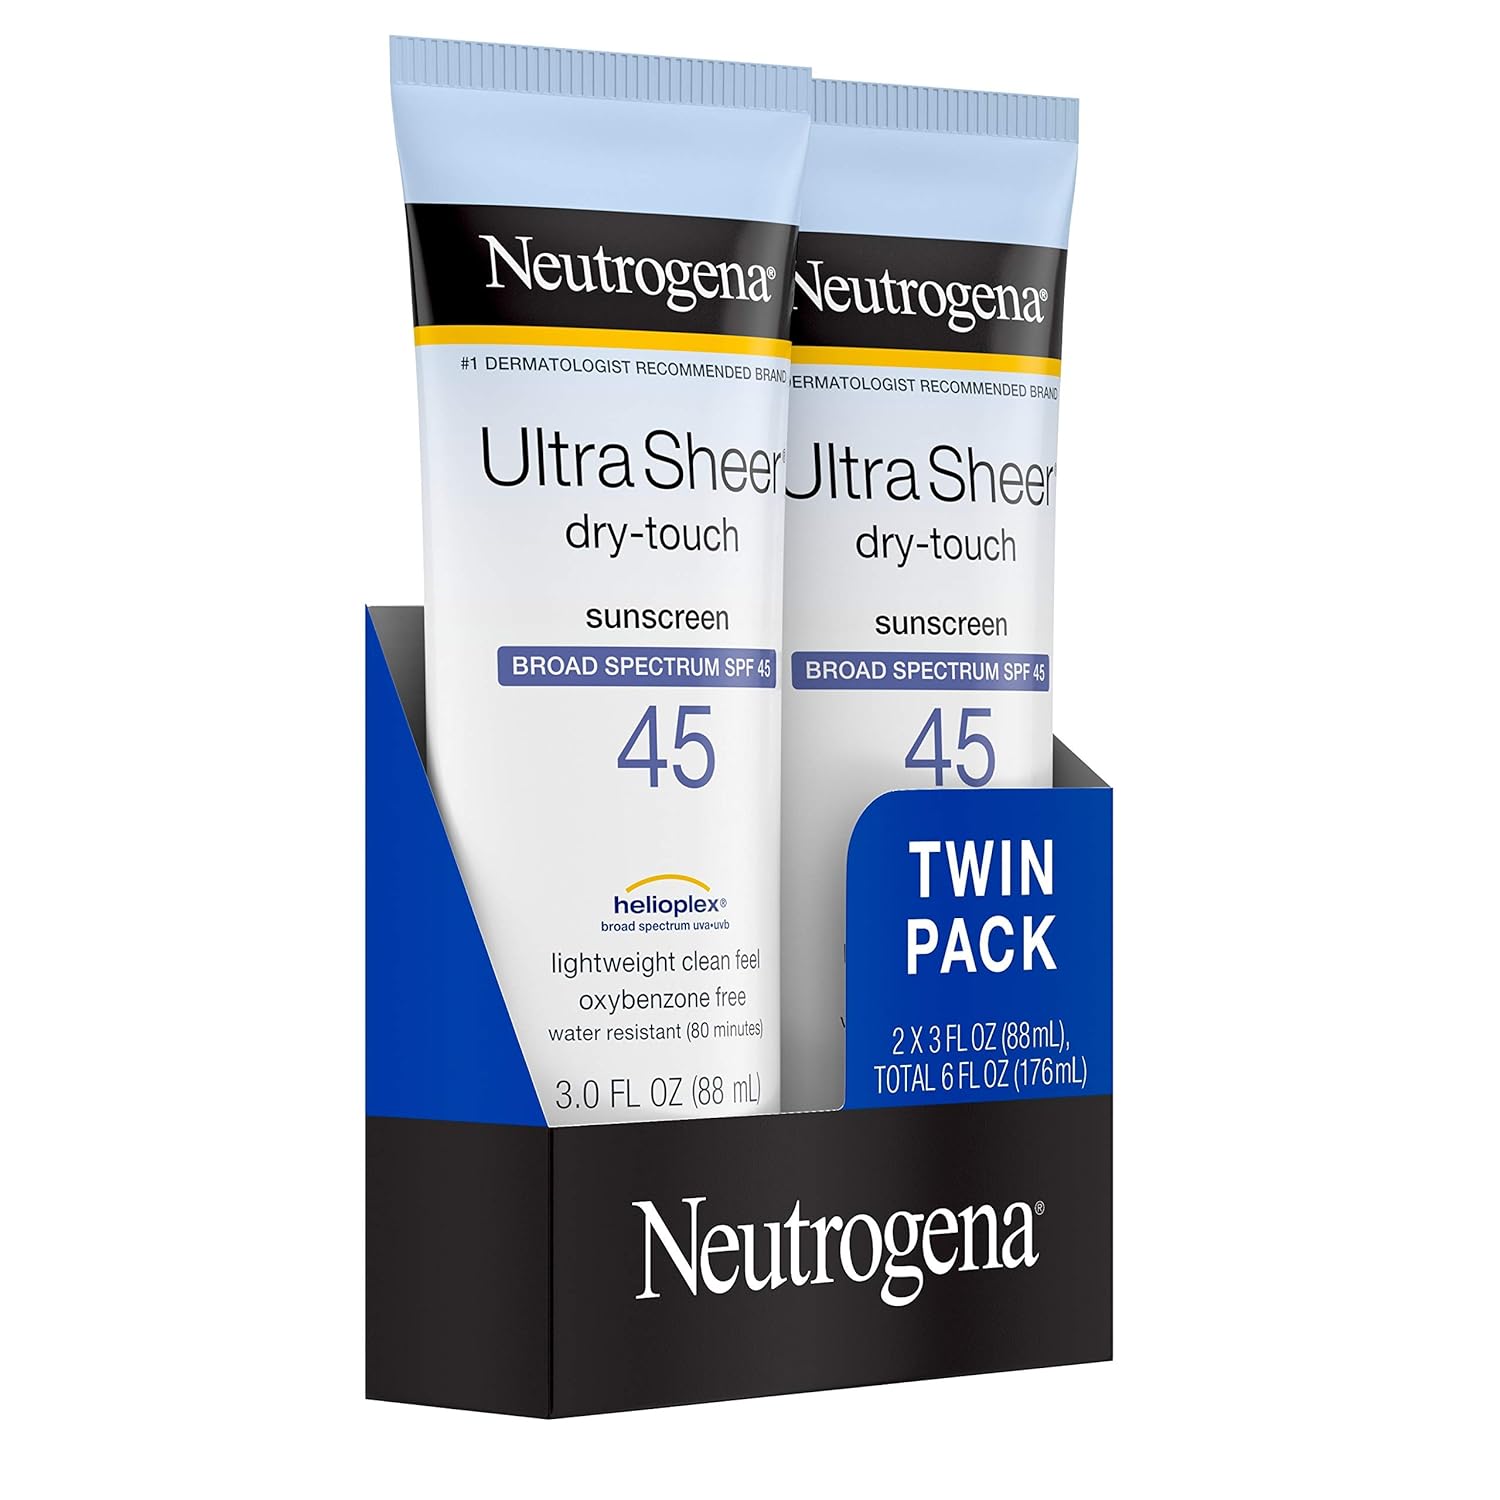  Neutrogena Ultra Sheer Dry-Touch Water Resistant and Non-Greasy Sunscreen Lotion with Broad Spectrum SPF 45, TSA-Compliant travel Size, 3 fl. oz, Pack of 2